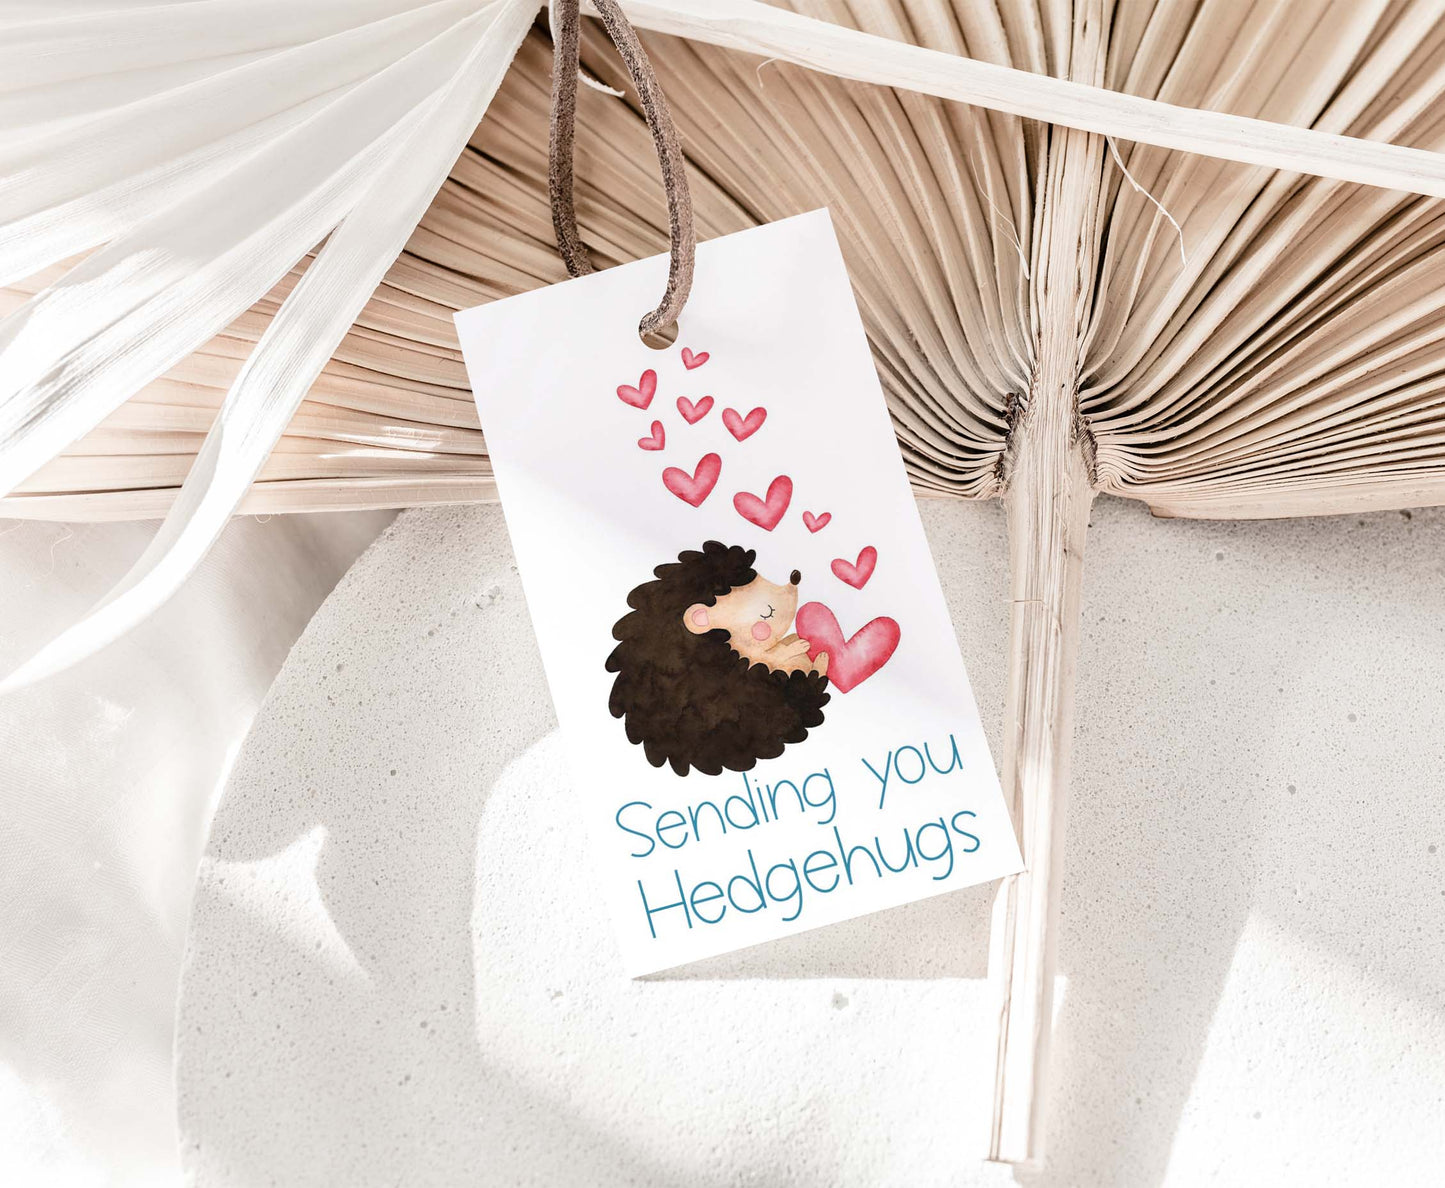 Sending you HedgehugsTags | Valentine's day Favor Tags - 119